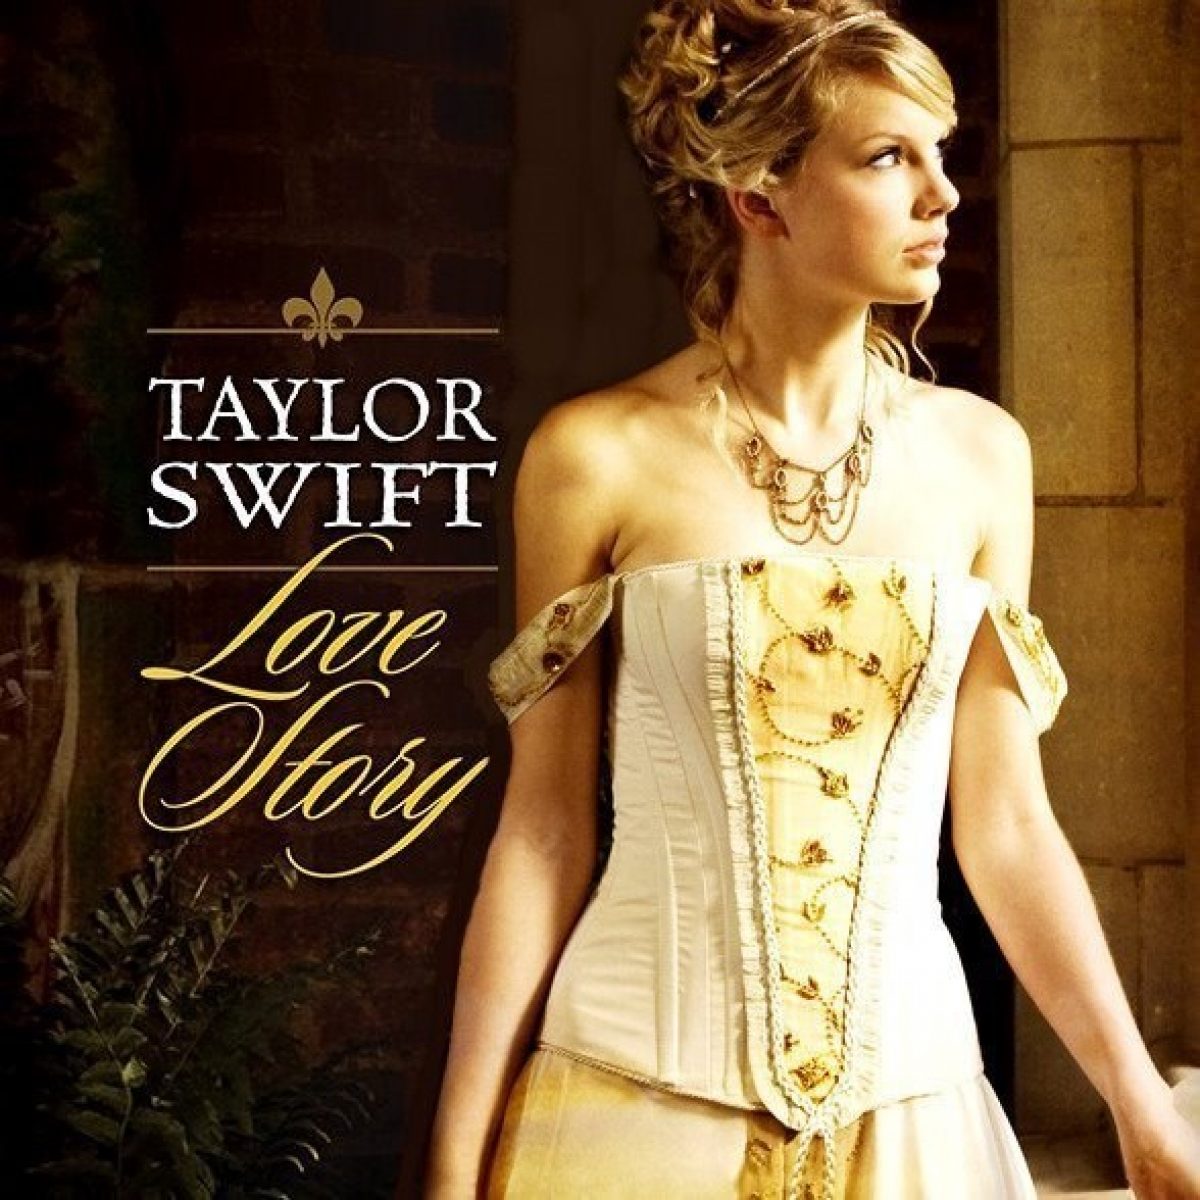 Taylor Swift - “Love Story” - American Noise